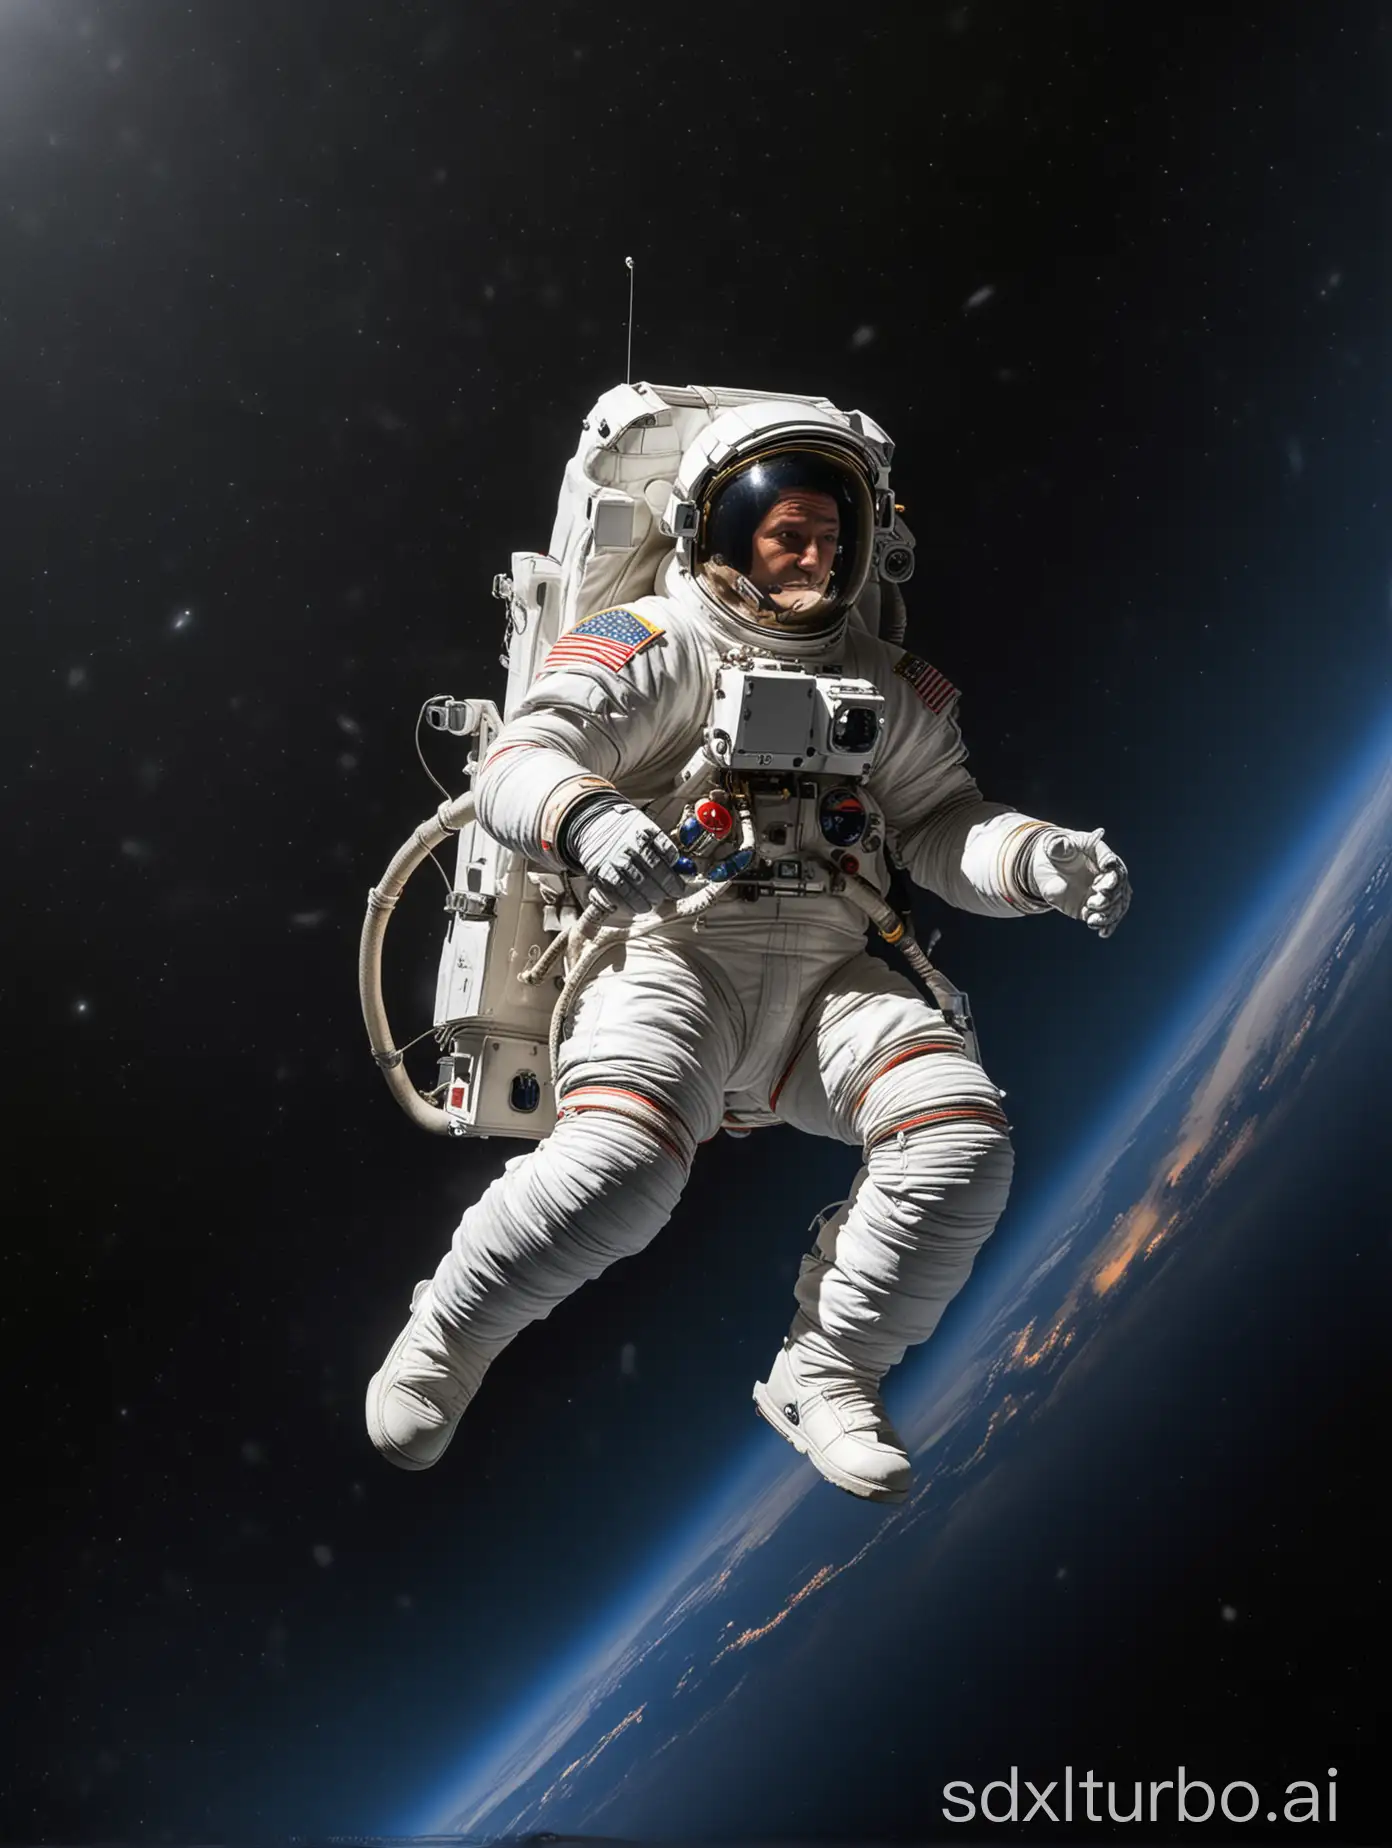 Spanish-Astronaut-Flying-Through-Space-with-Propulsion-Backpack